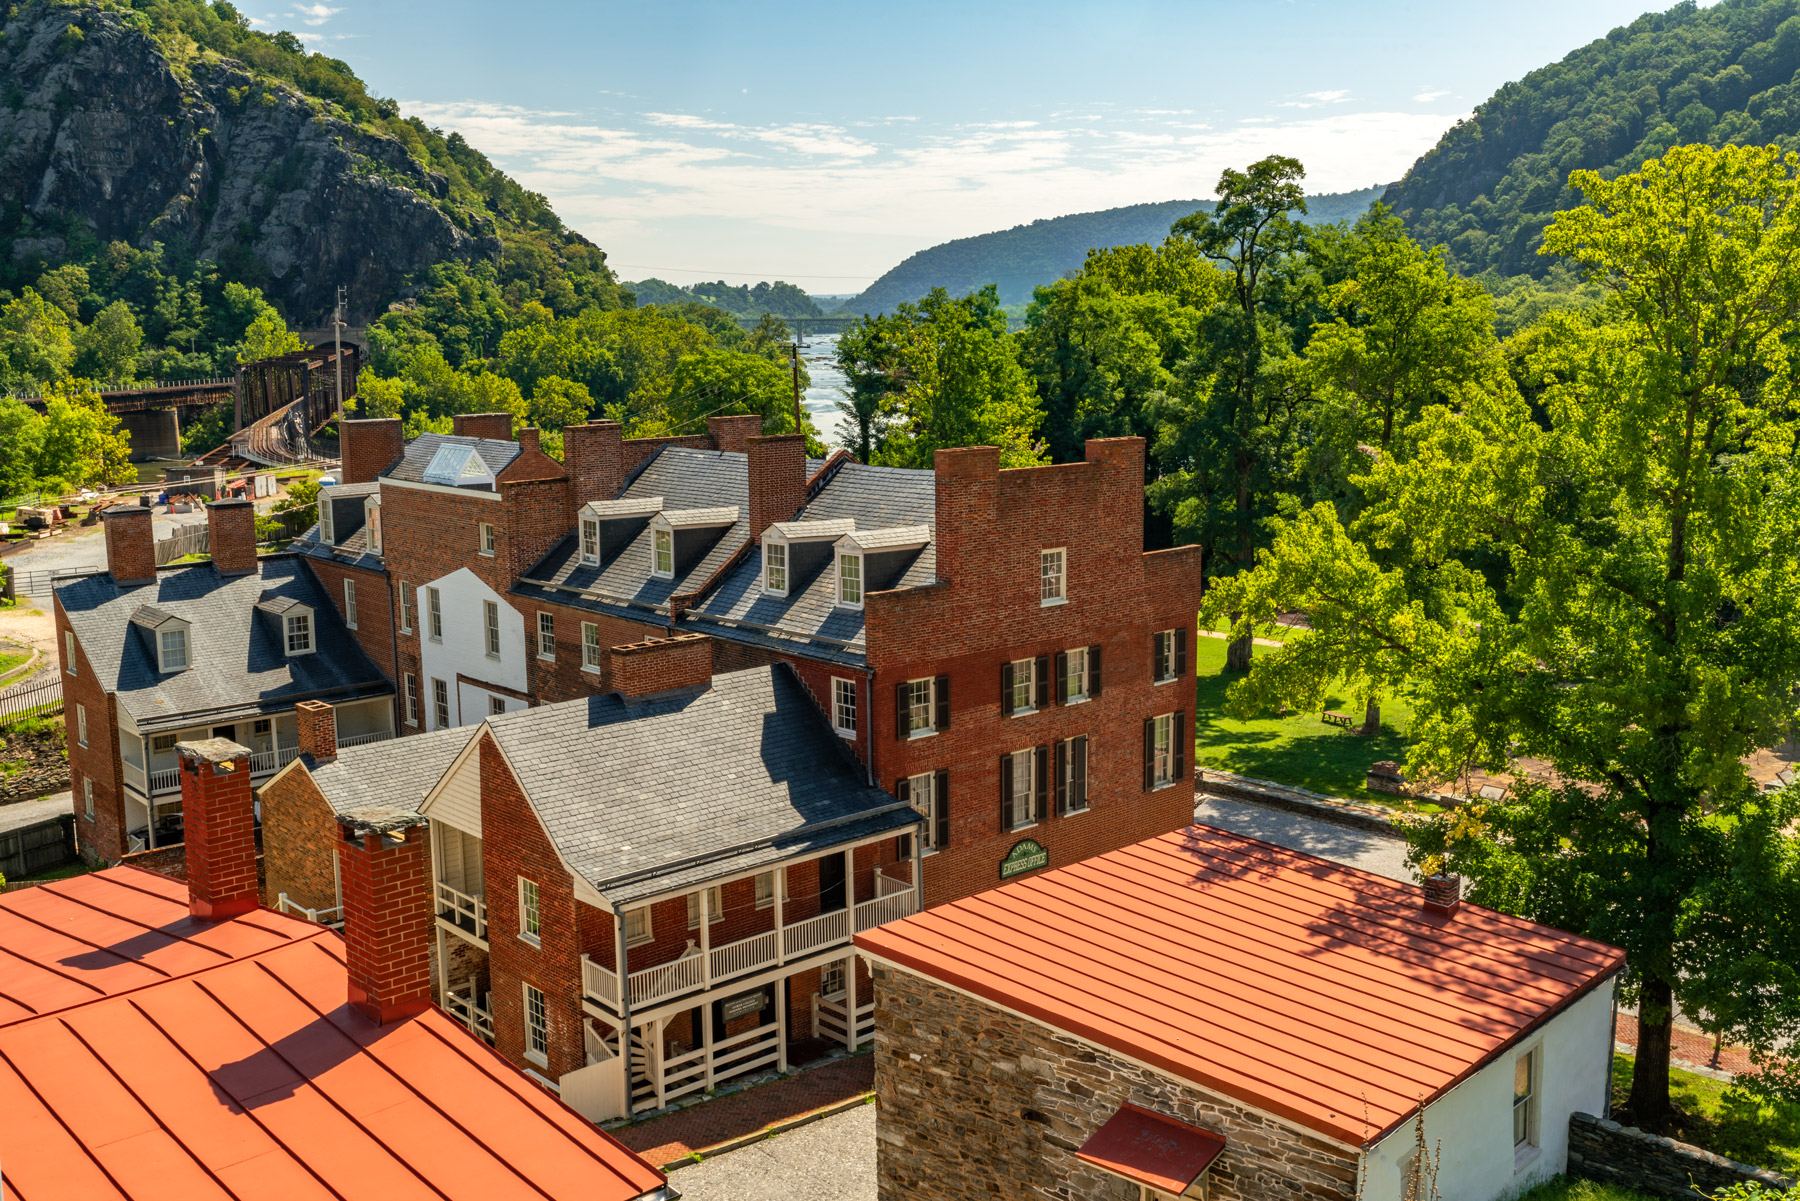 Things to do in Harpers Ferry WV